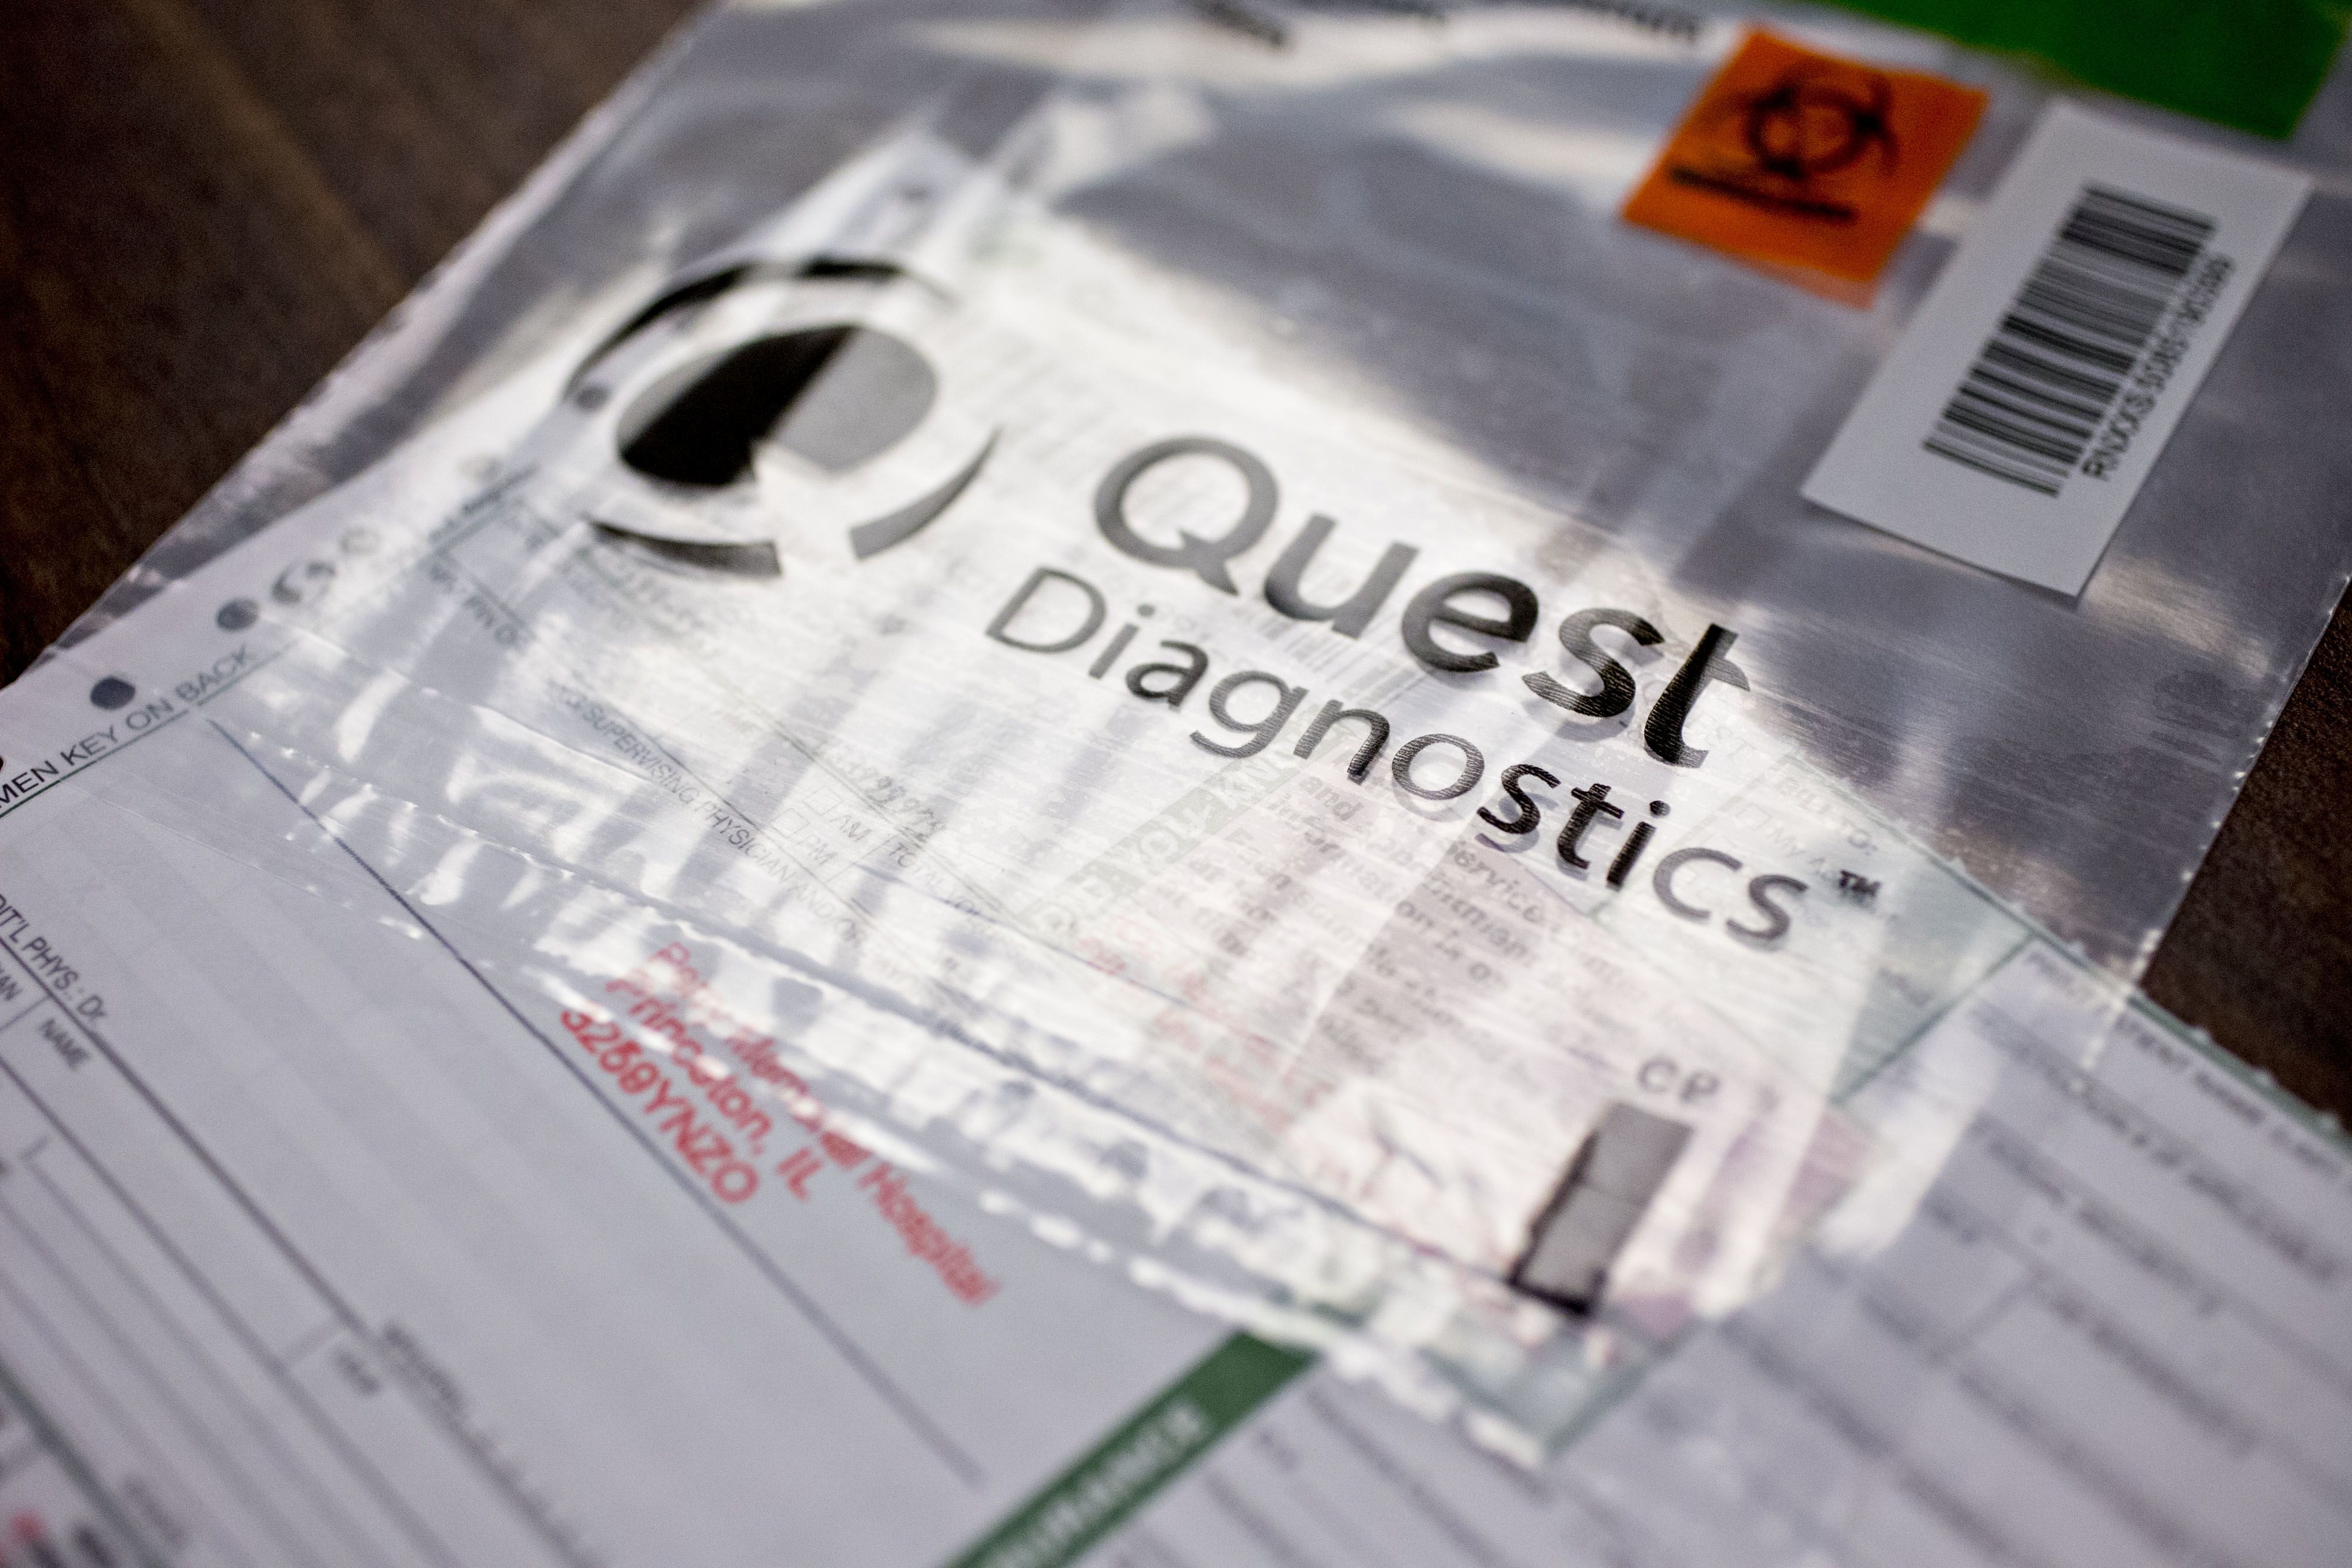 Quest Diagnostics says nearly 12 million patients may have had data breached